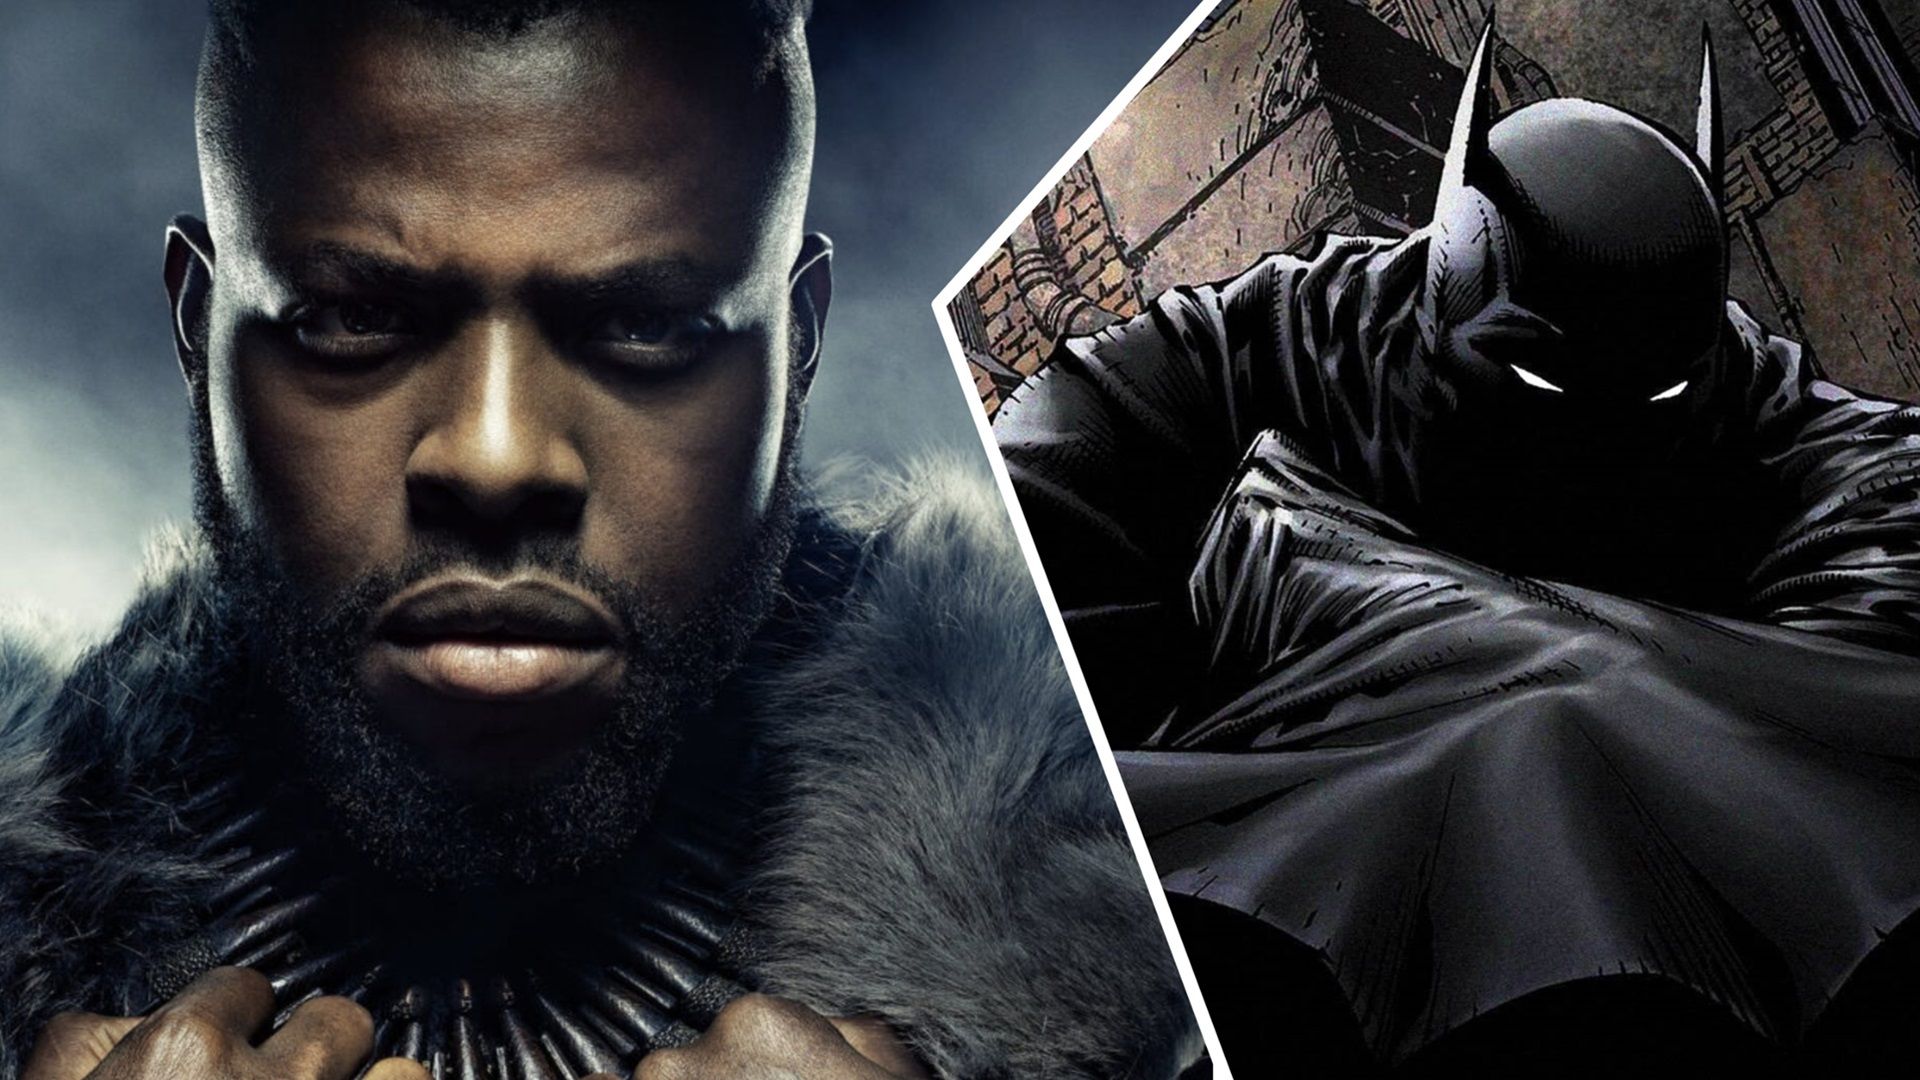 Black Panther Star Would Love to Play Batman in the DCU: ‘I’m All for It’